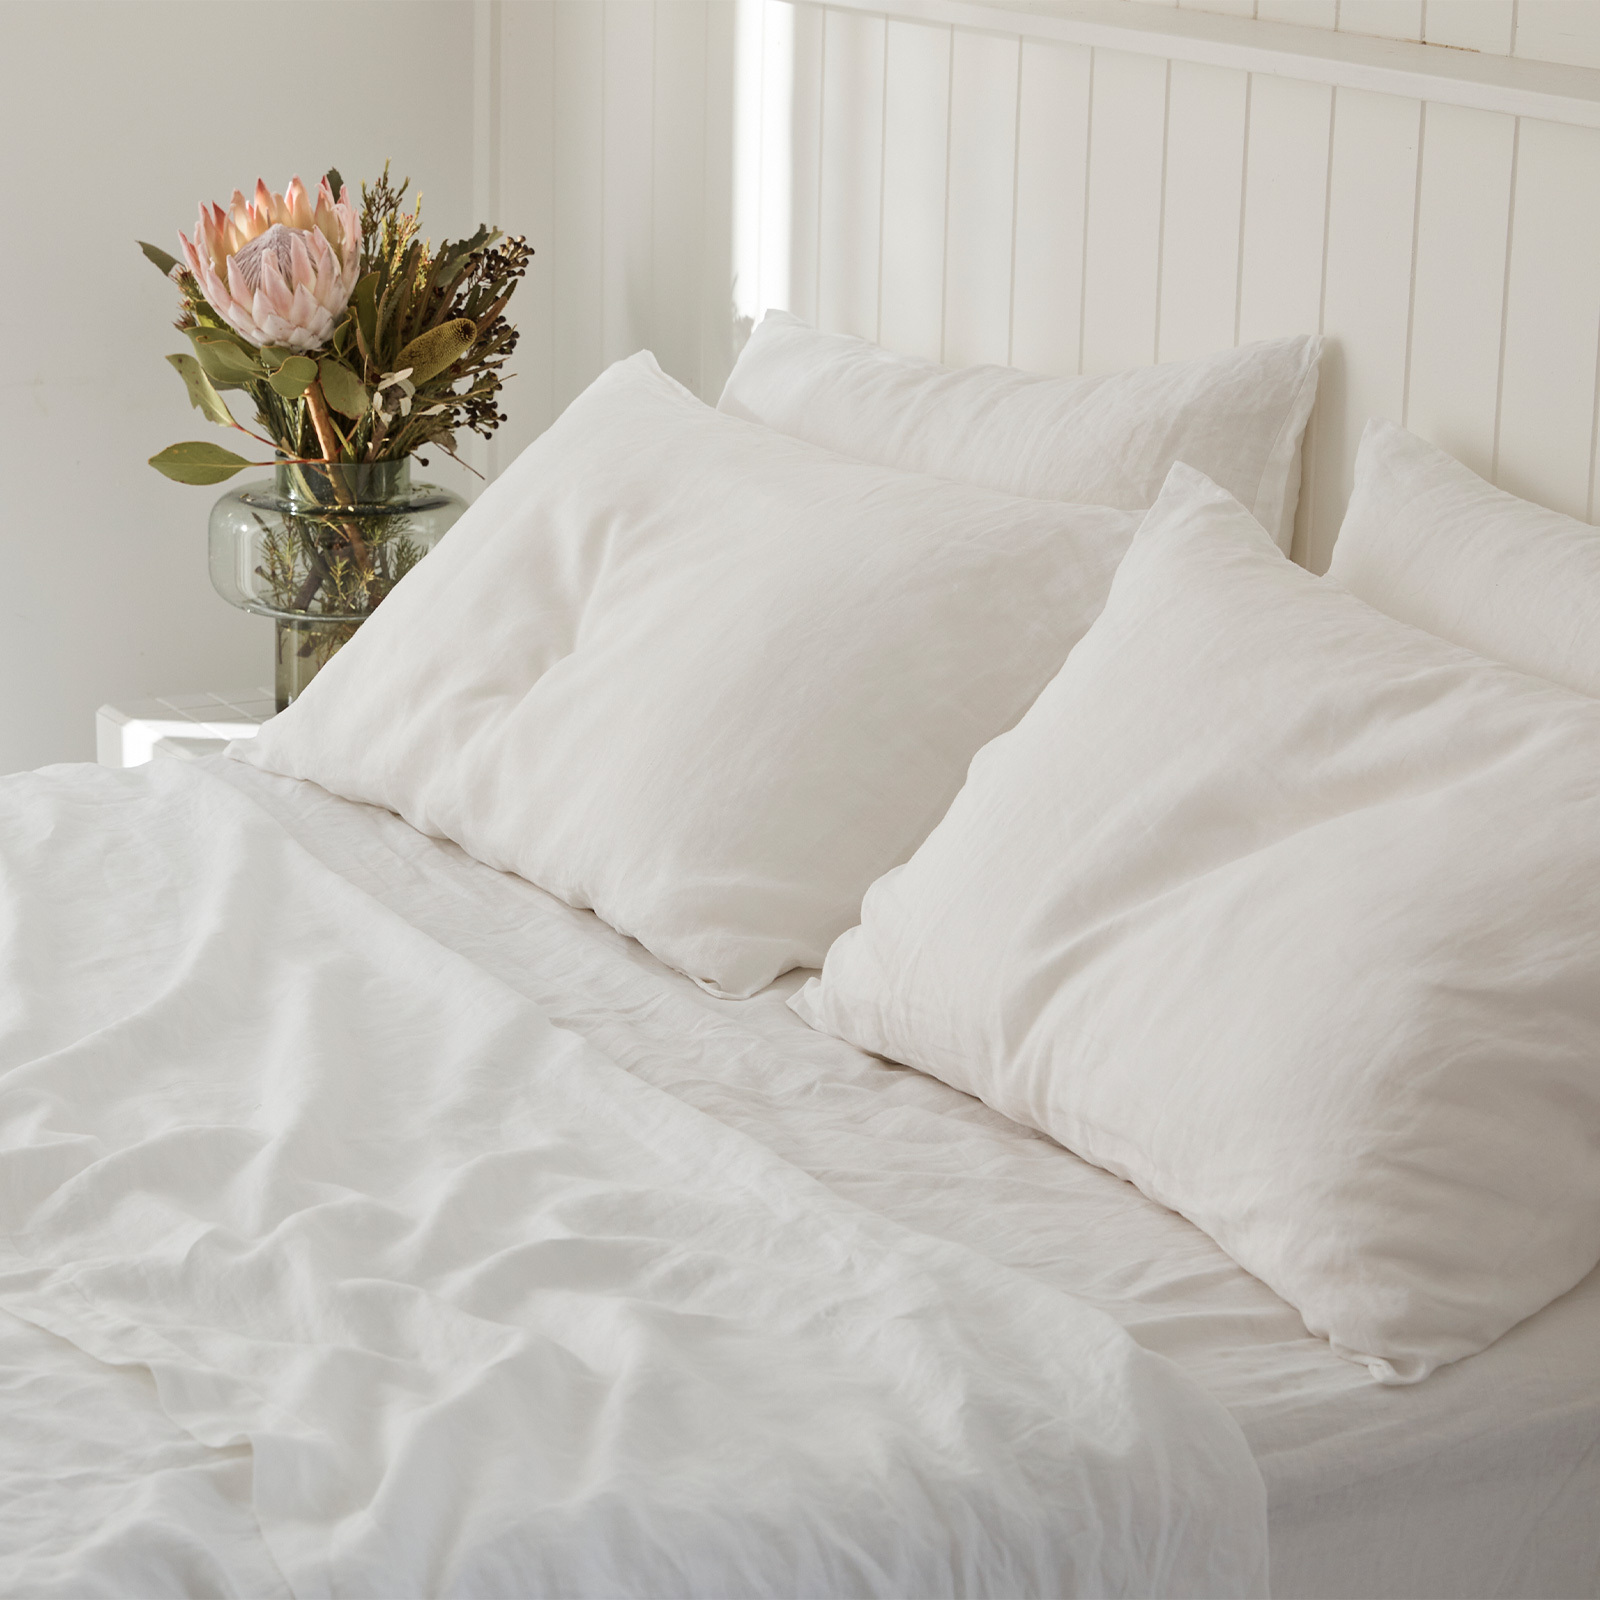 French linen flat sheet in White